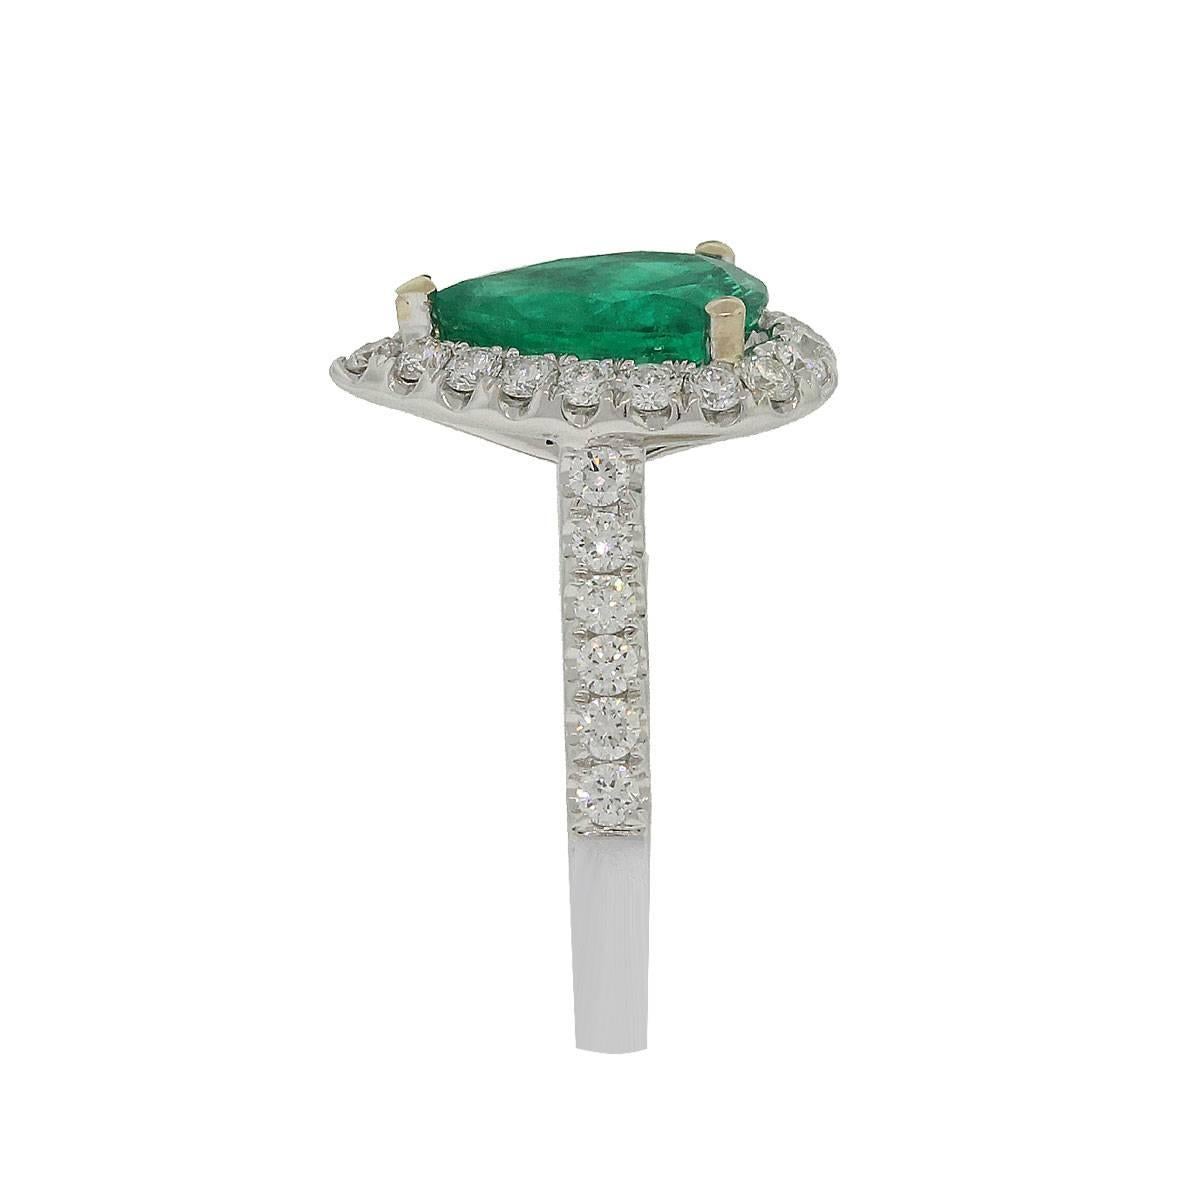 Style: 18k White Gold 2.07ct Pear Shape Emerald & Diamond Halo Engagement Ring
Material: 18k White Gold
Gemstone Details: 1 Pear Shape Emerald approximately 2.07ct.  0.46